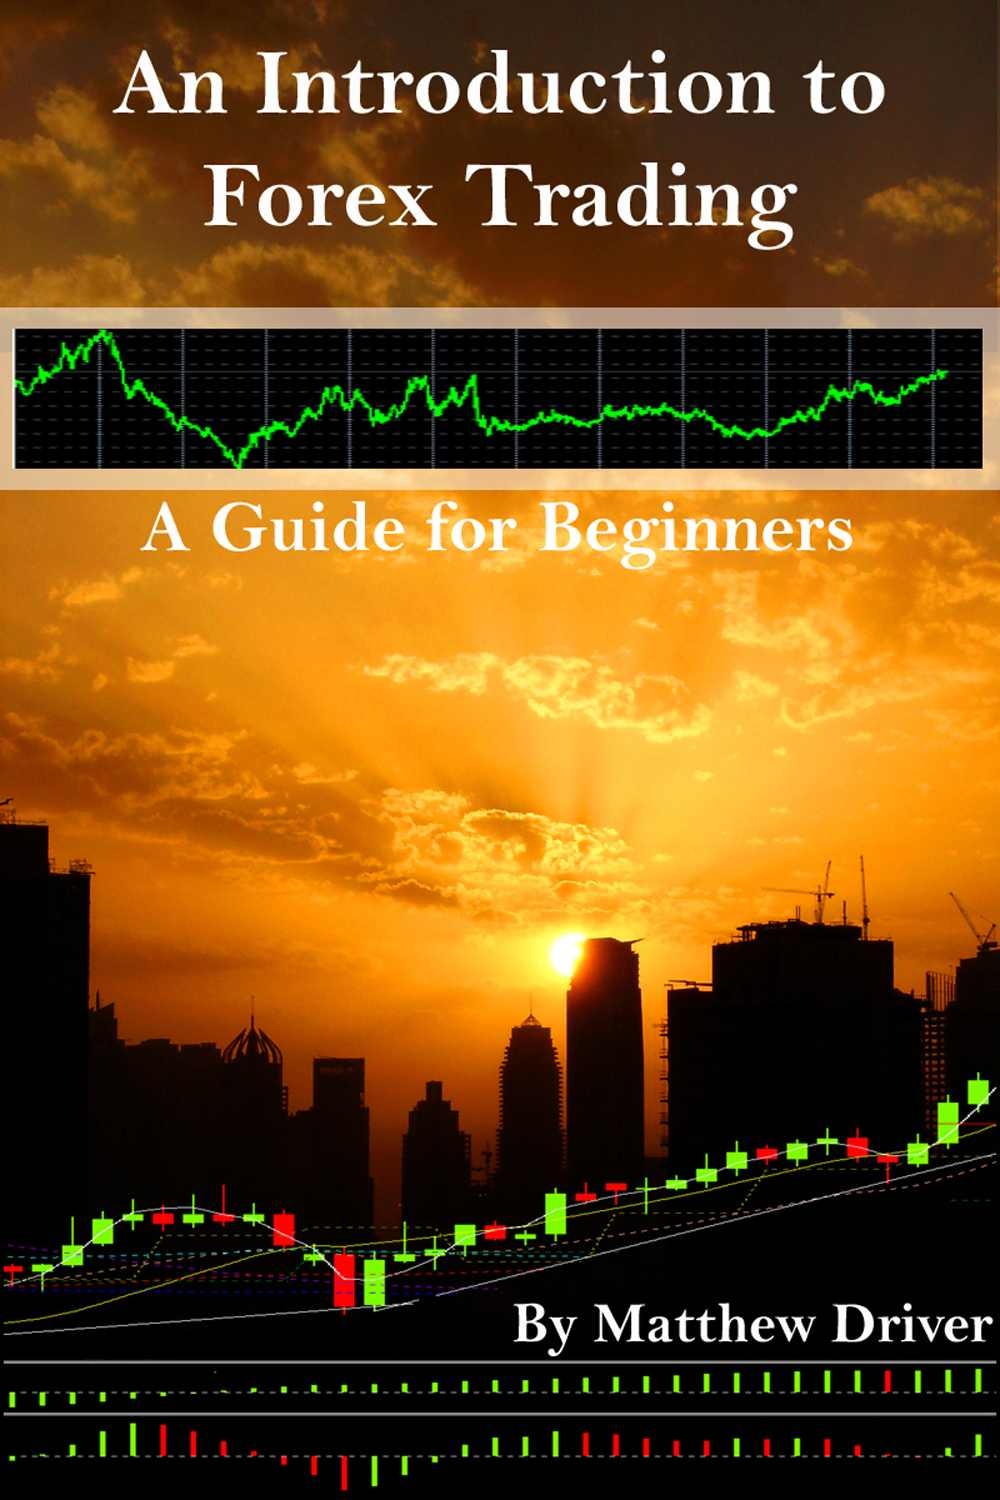 AN INTRODUCTION TO FOREX TRADING - Free E-books